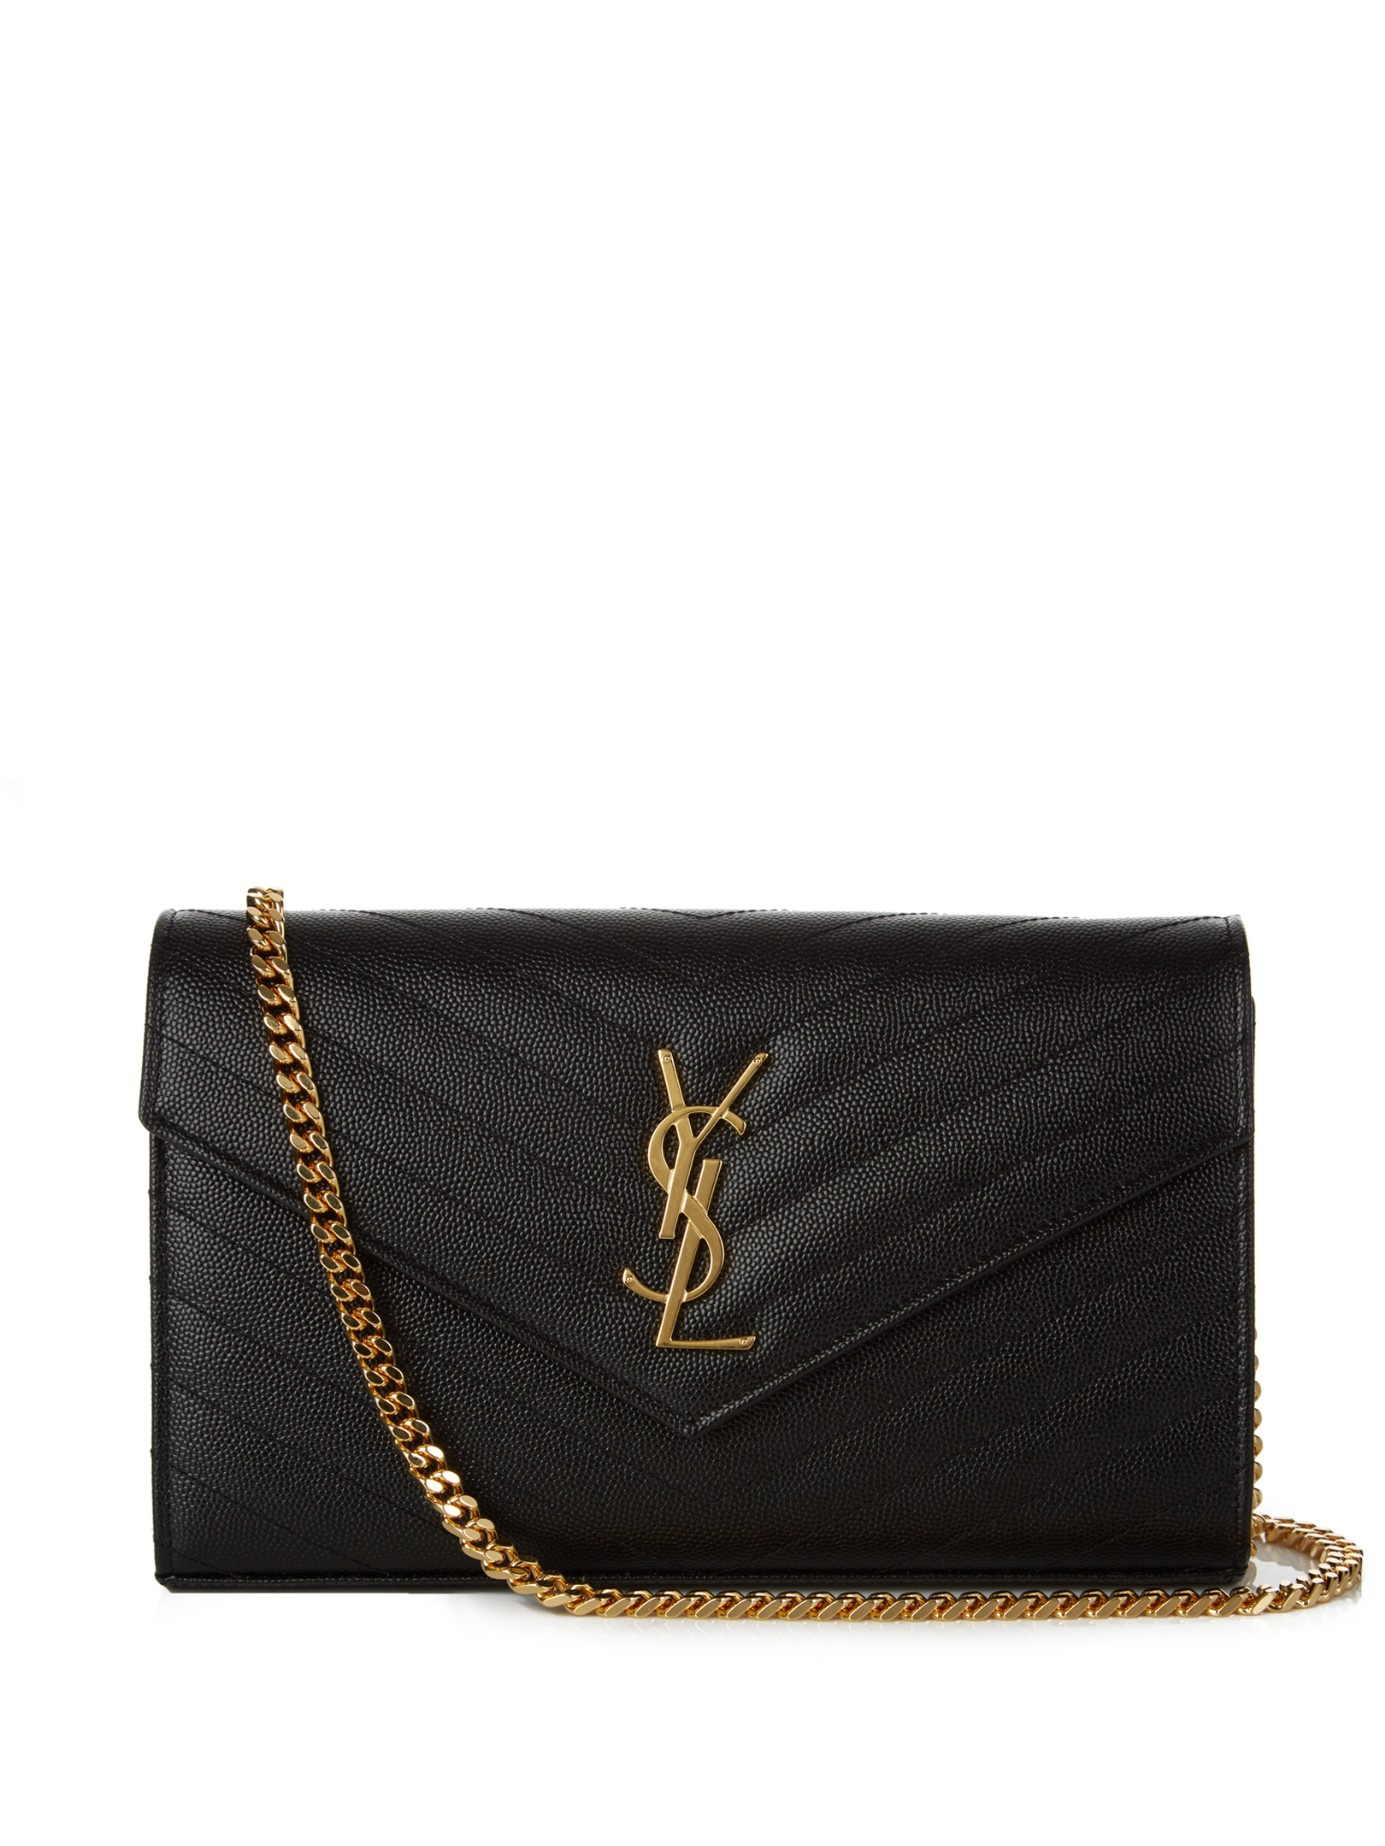 Saint Laurent Leather Ysl Monogrammed Suede Quilted Bag In Black - Lyst